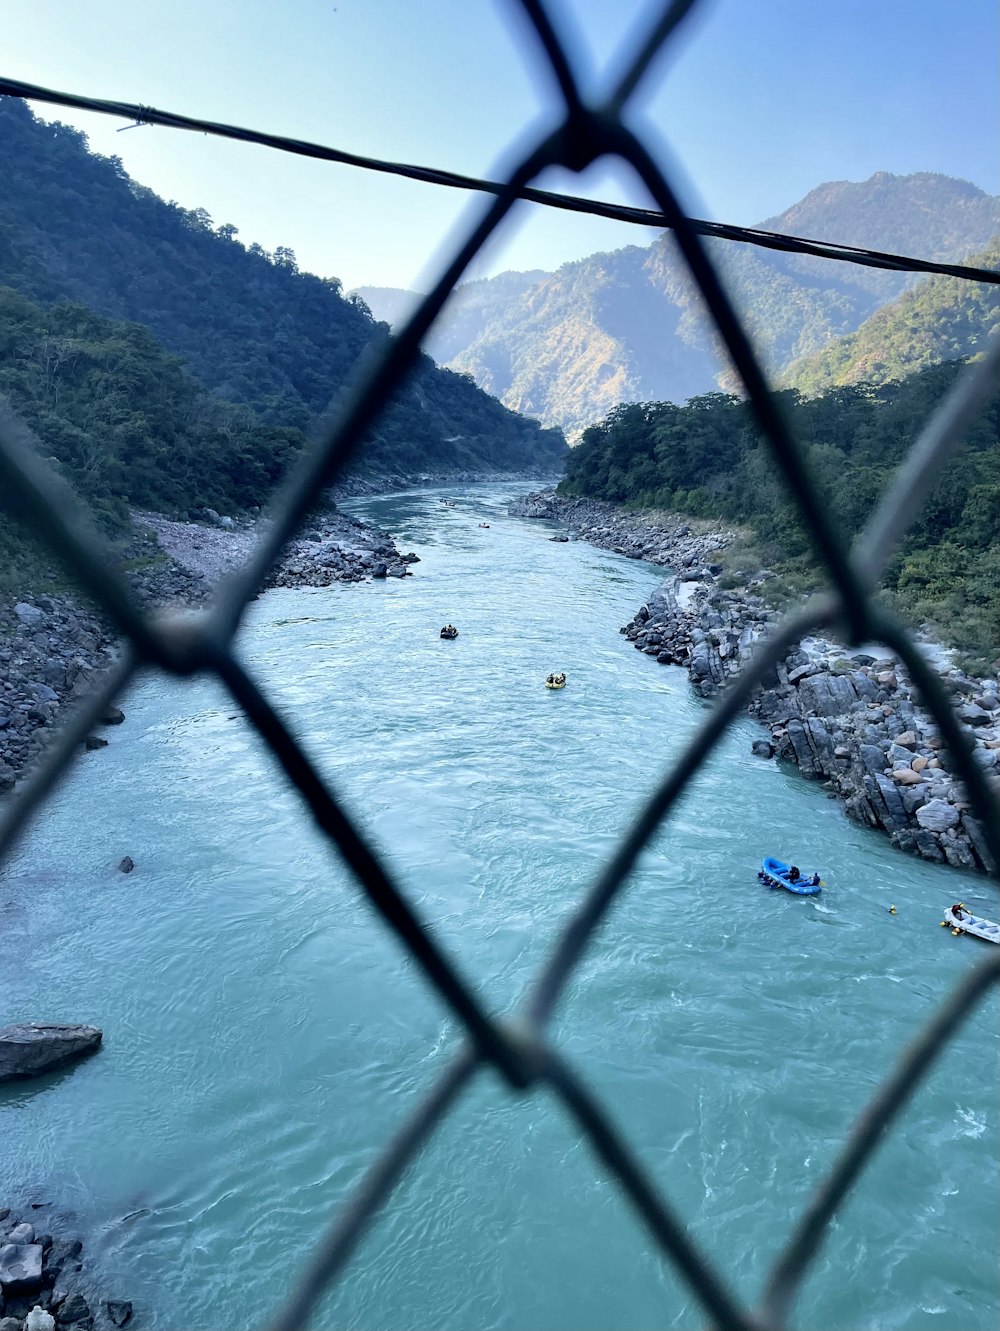 a view of a river through a chain link fence